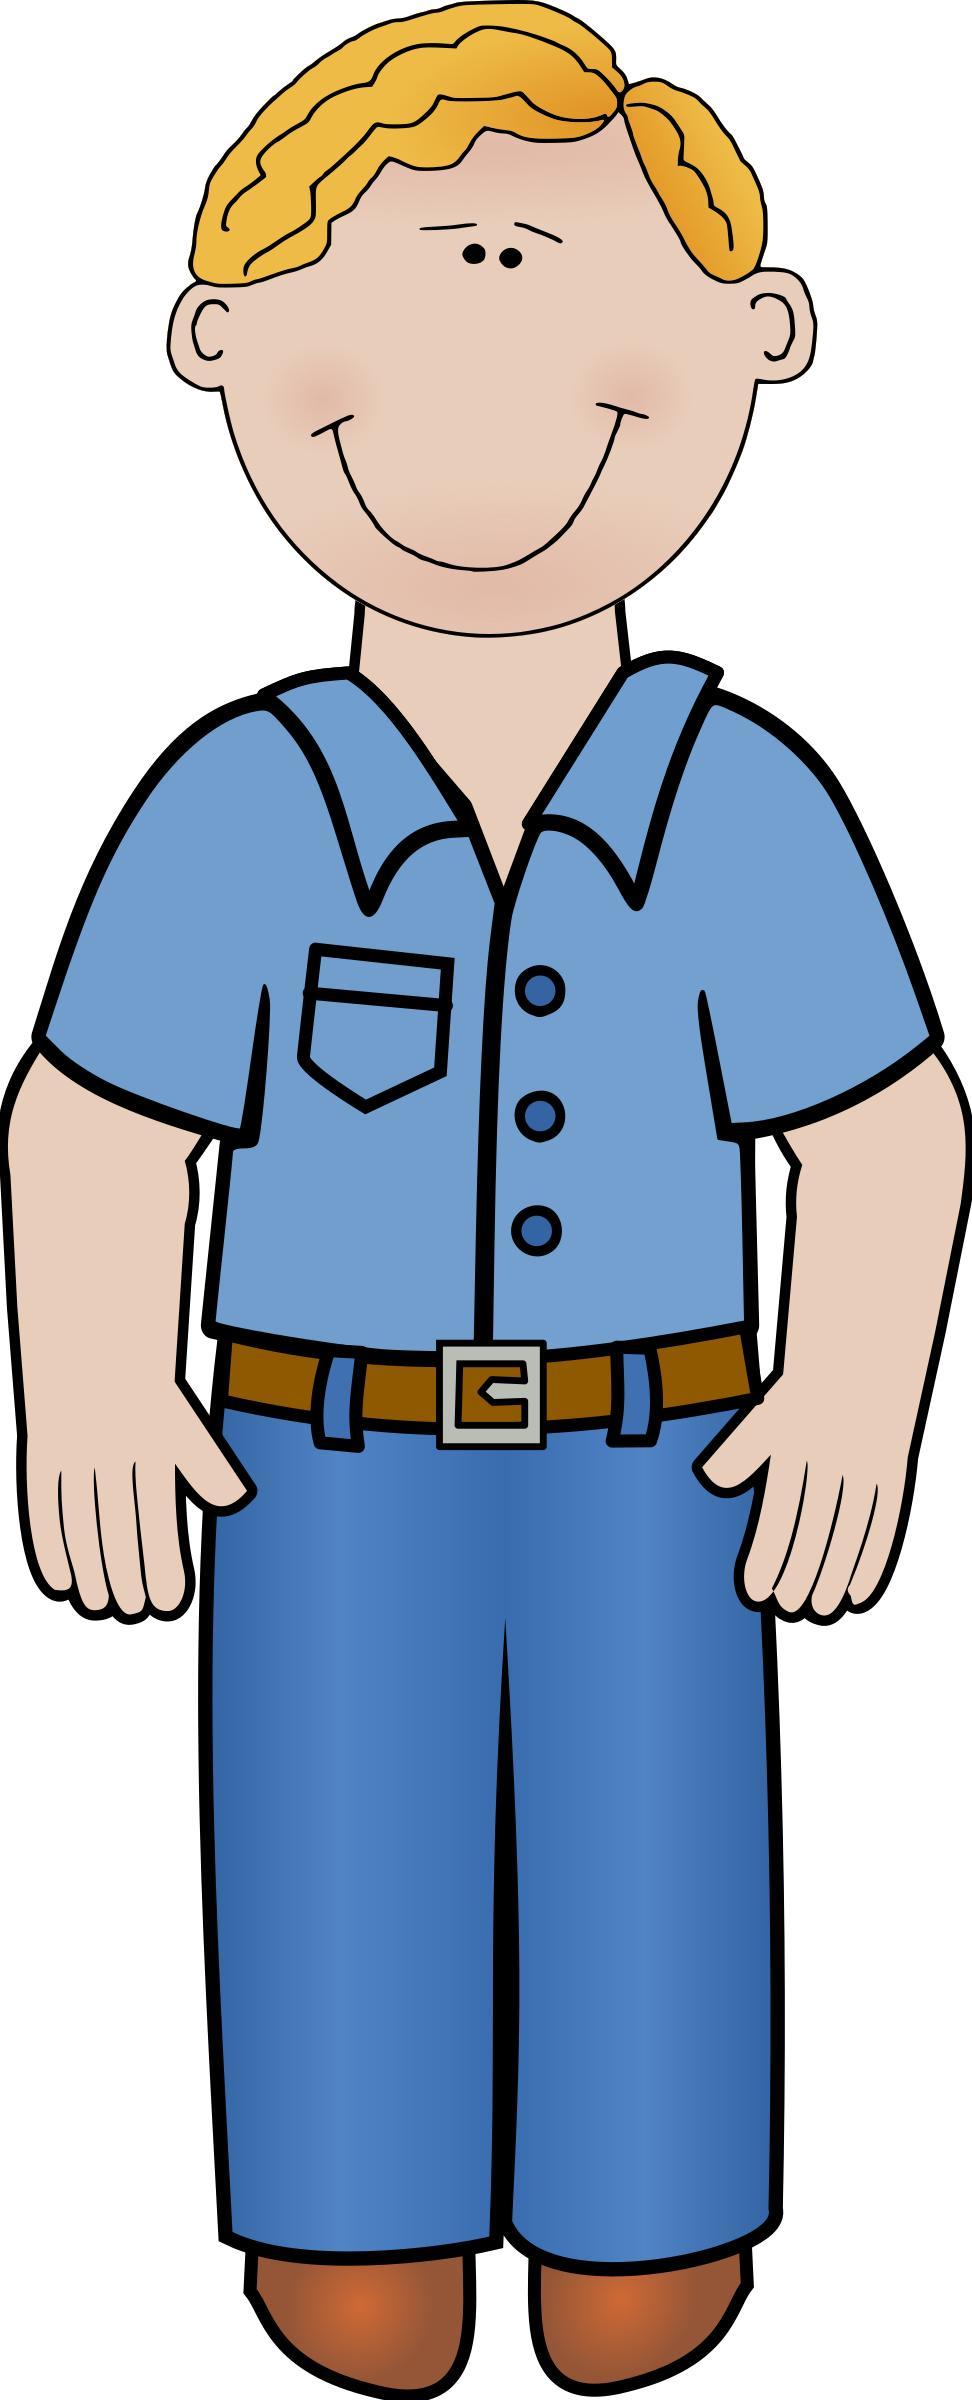 daddy standing 01 png transparent